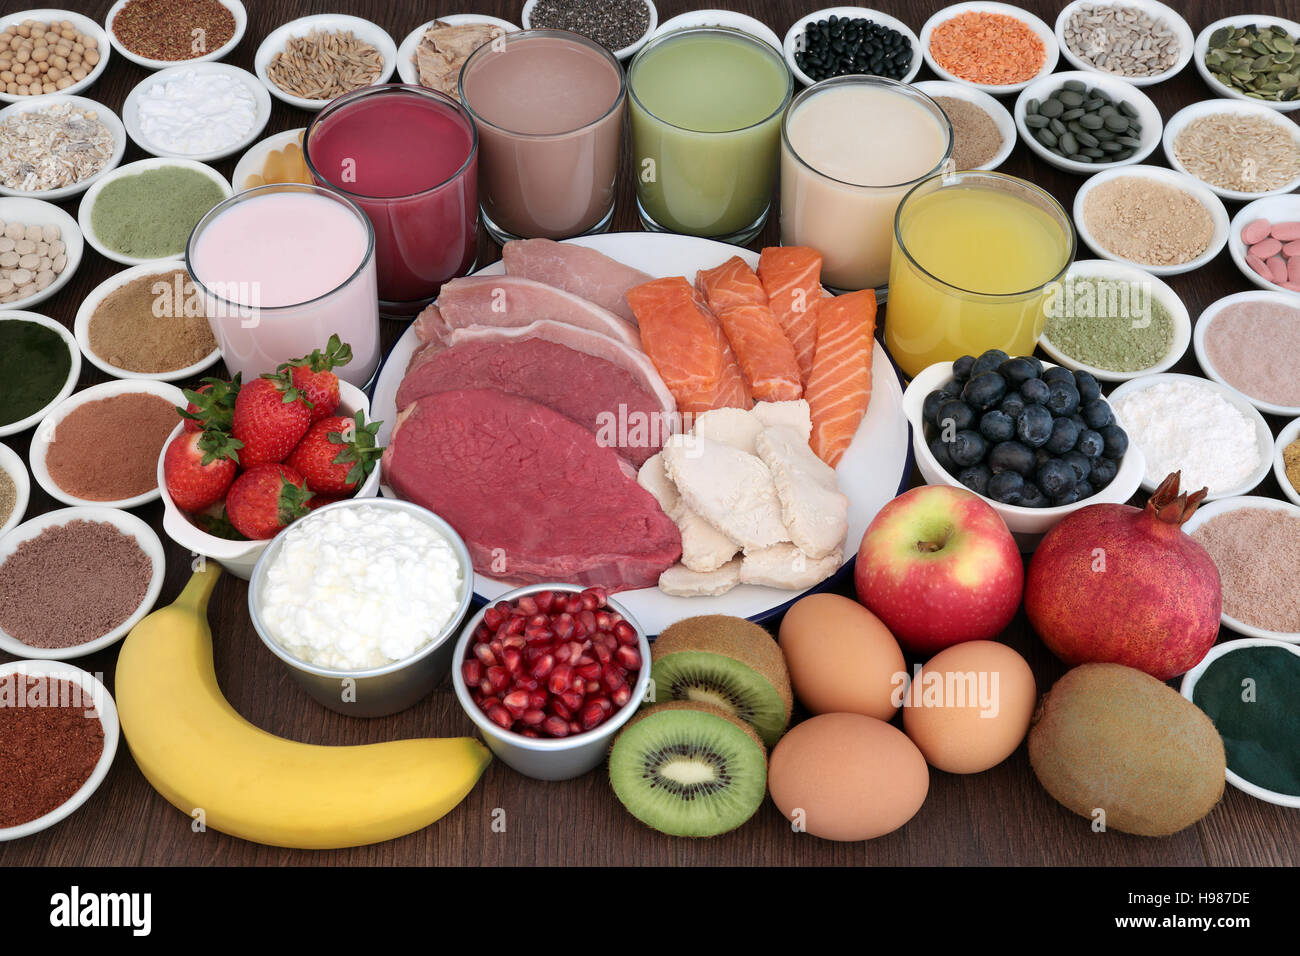 Body building  food and drinks including high protein foods and supplement powders. Stock Photo